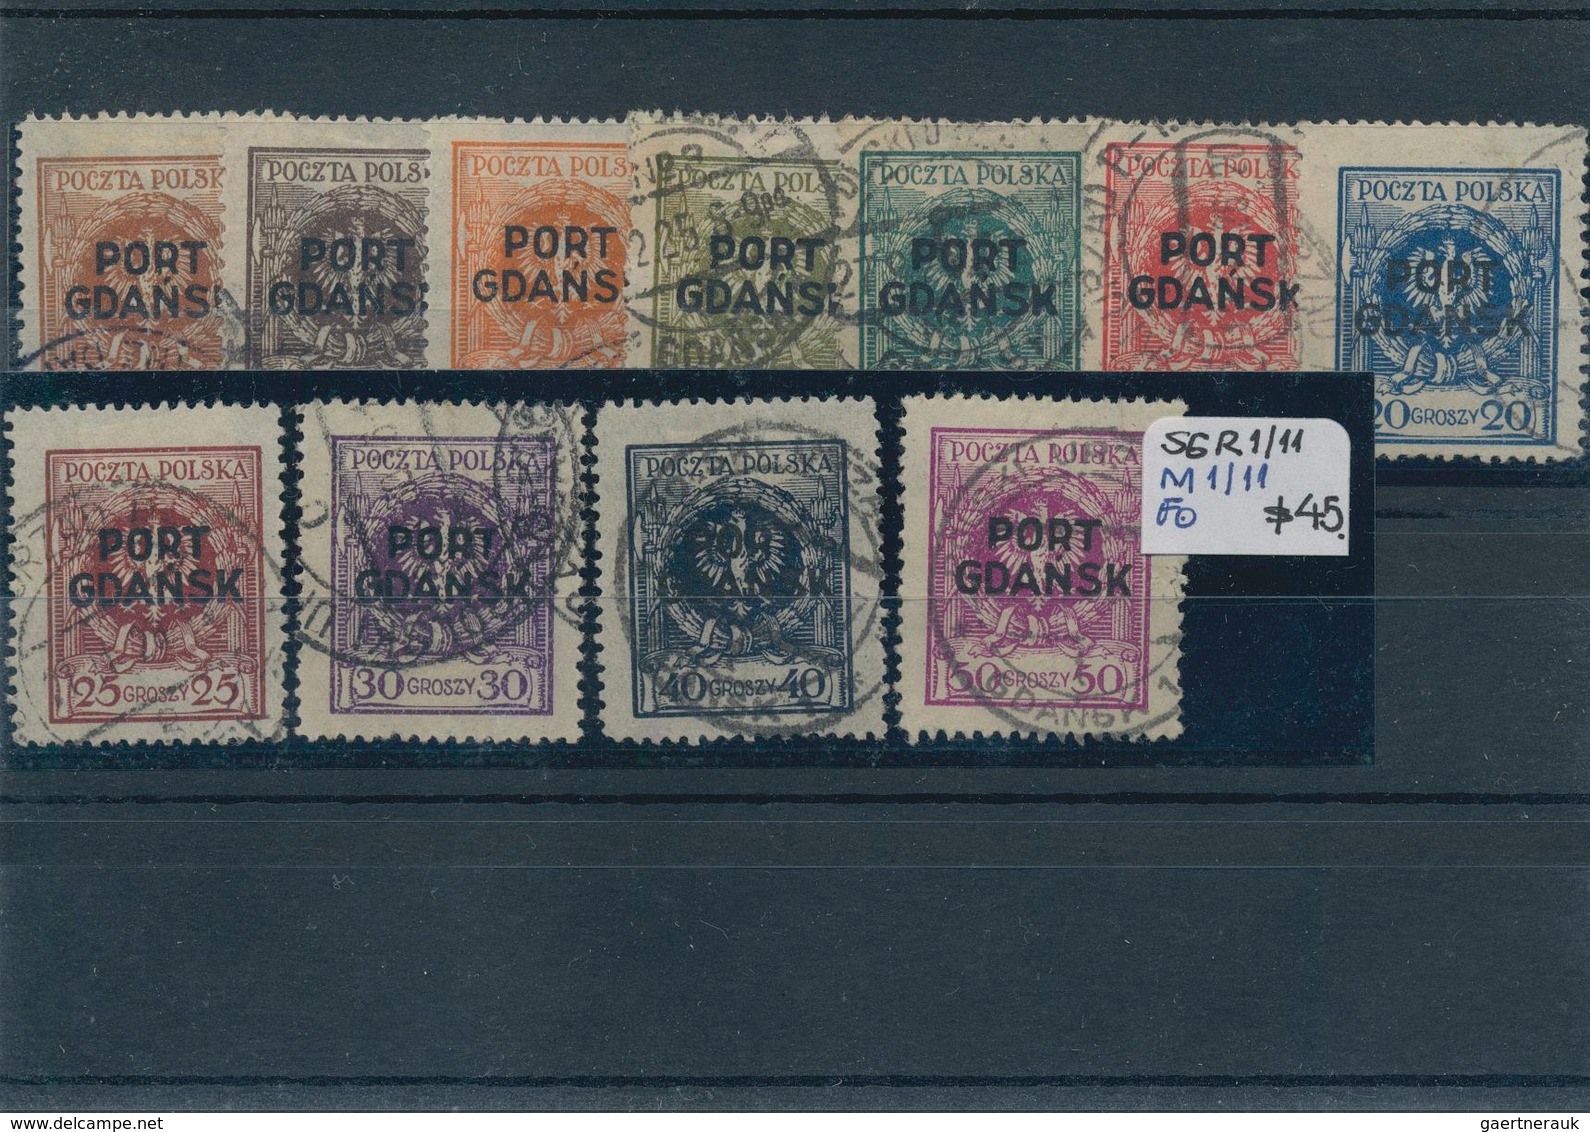 Polen: 1918/1960 (ca.), mint and used holding neatly sorted on stockcards, showing a nice section pr